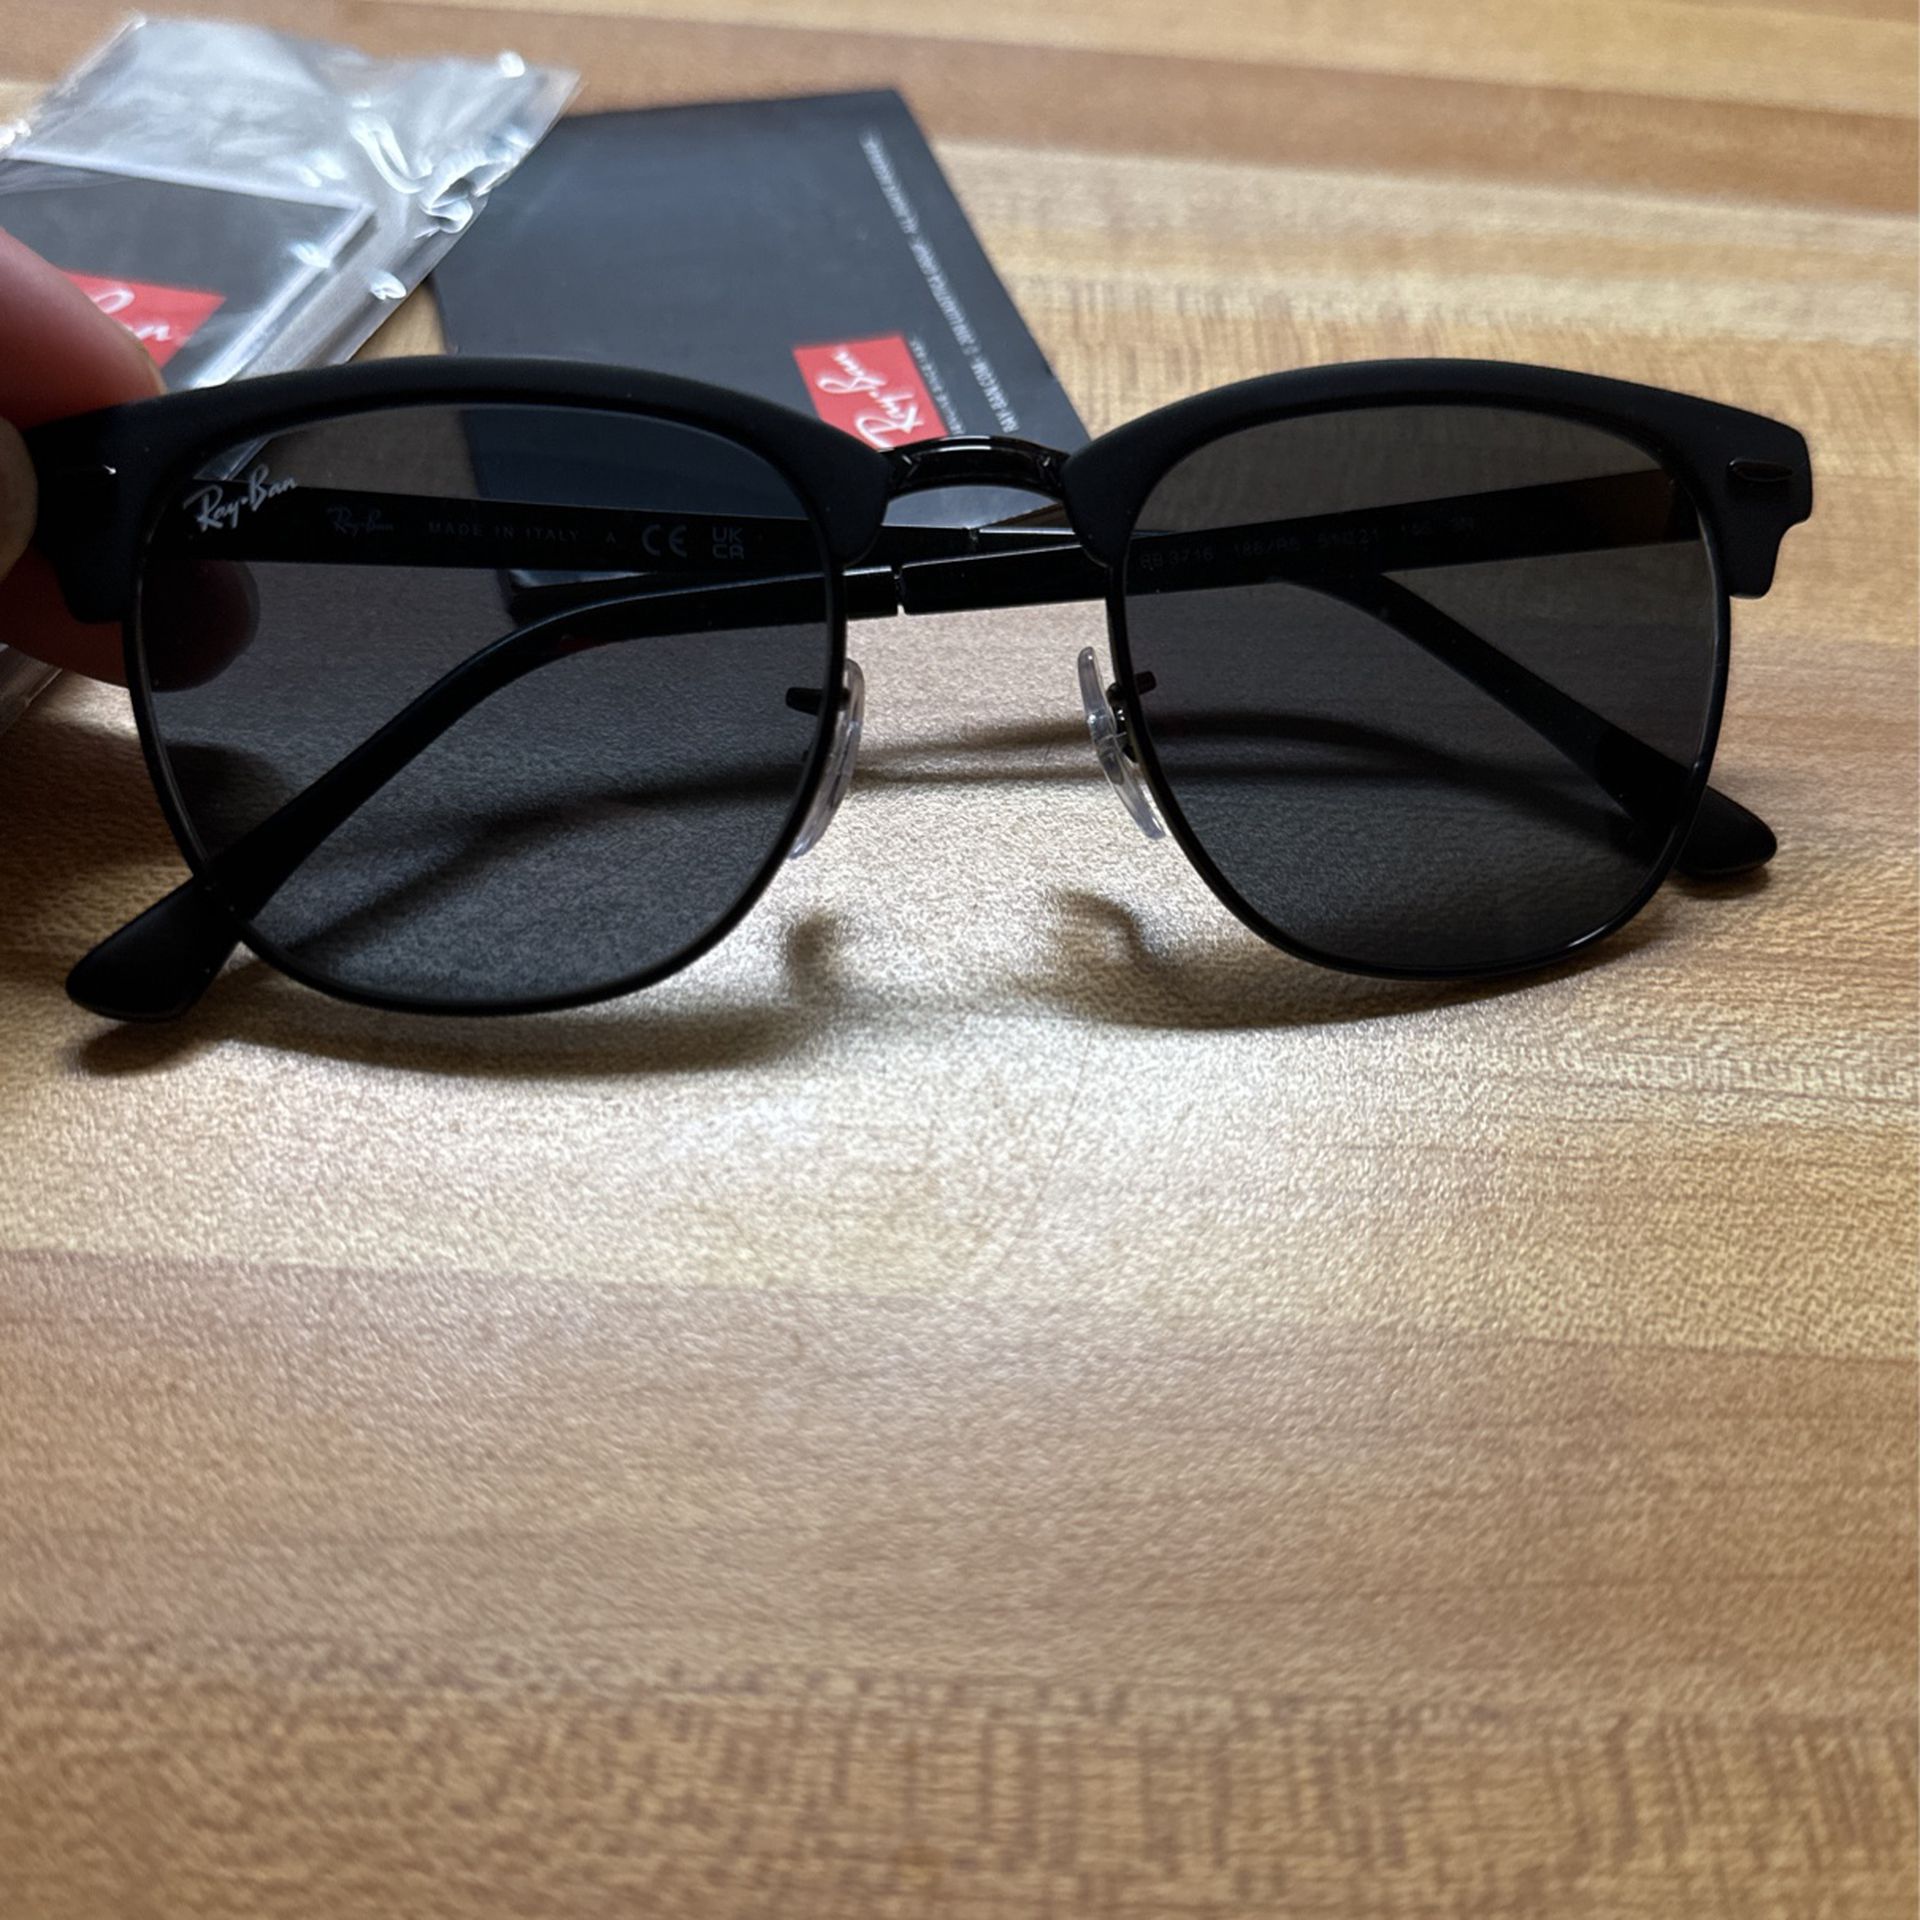 Authentic Ray Bans Sun Glasses